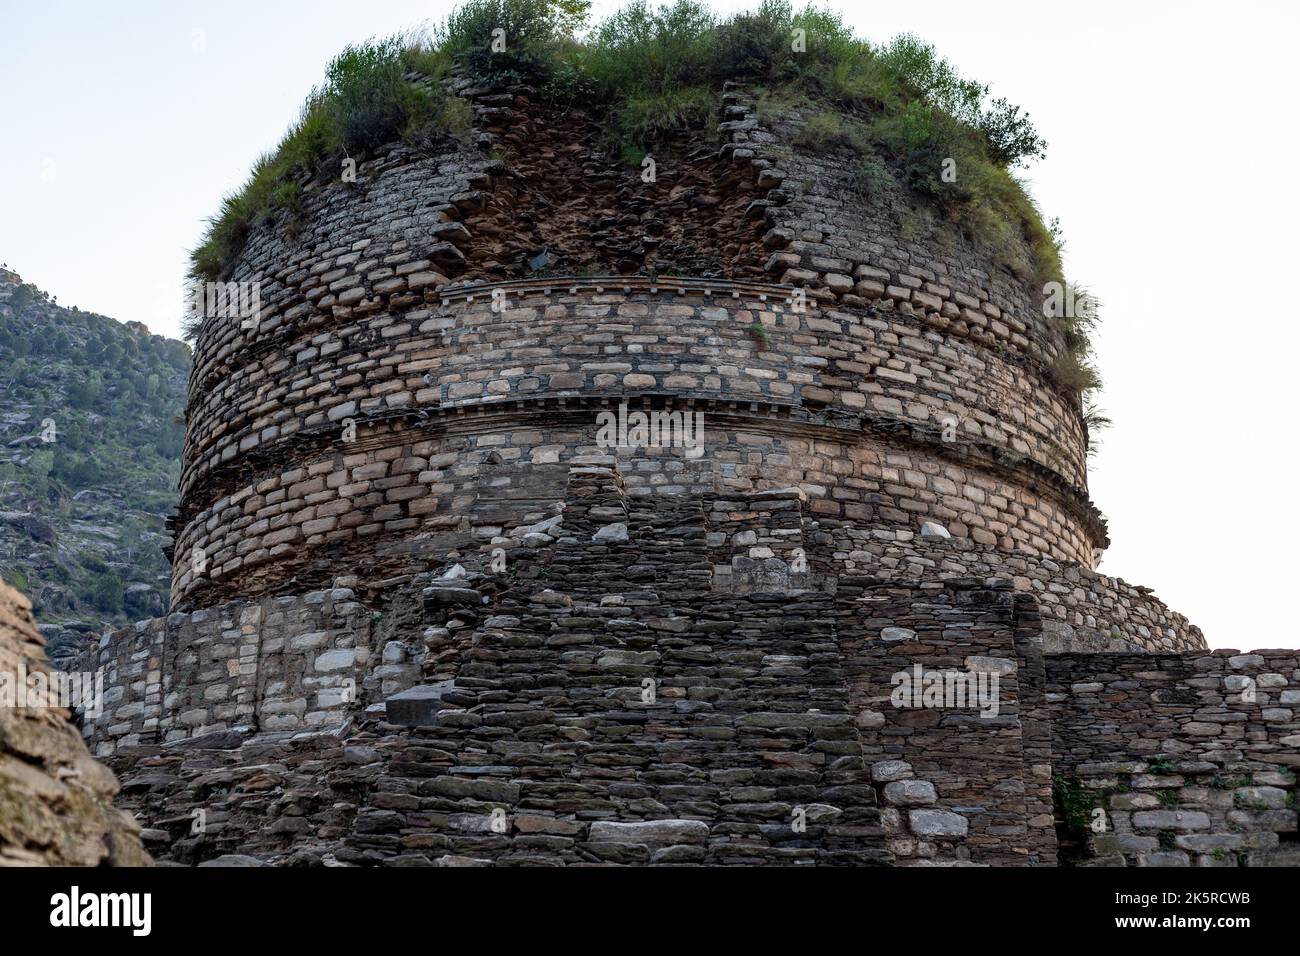 Amluk-Dara stupa is located in Swat valley of Pakistan. [1] It is a part of Gandhara civilization at Amluk-Dara. The stupa is believed to have been bu Stock Photo